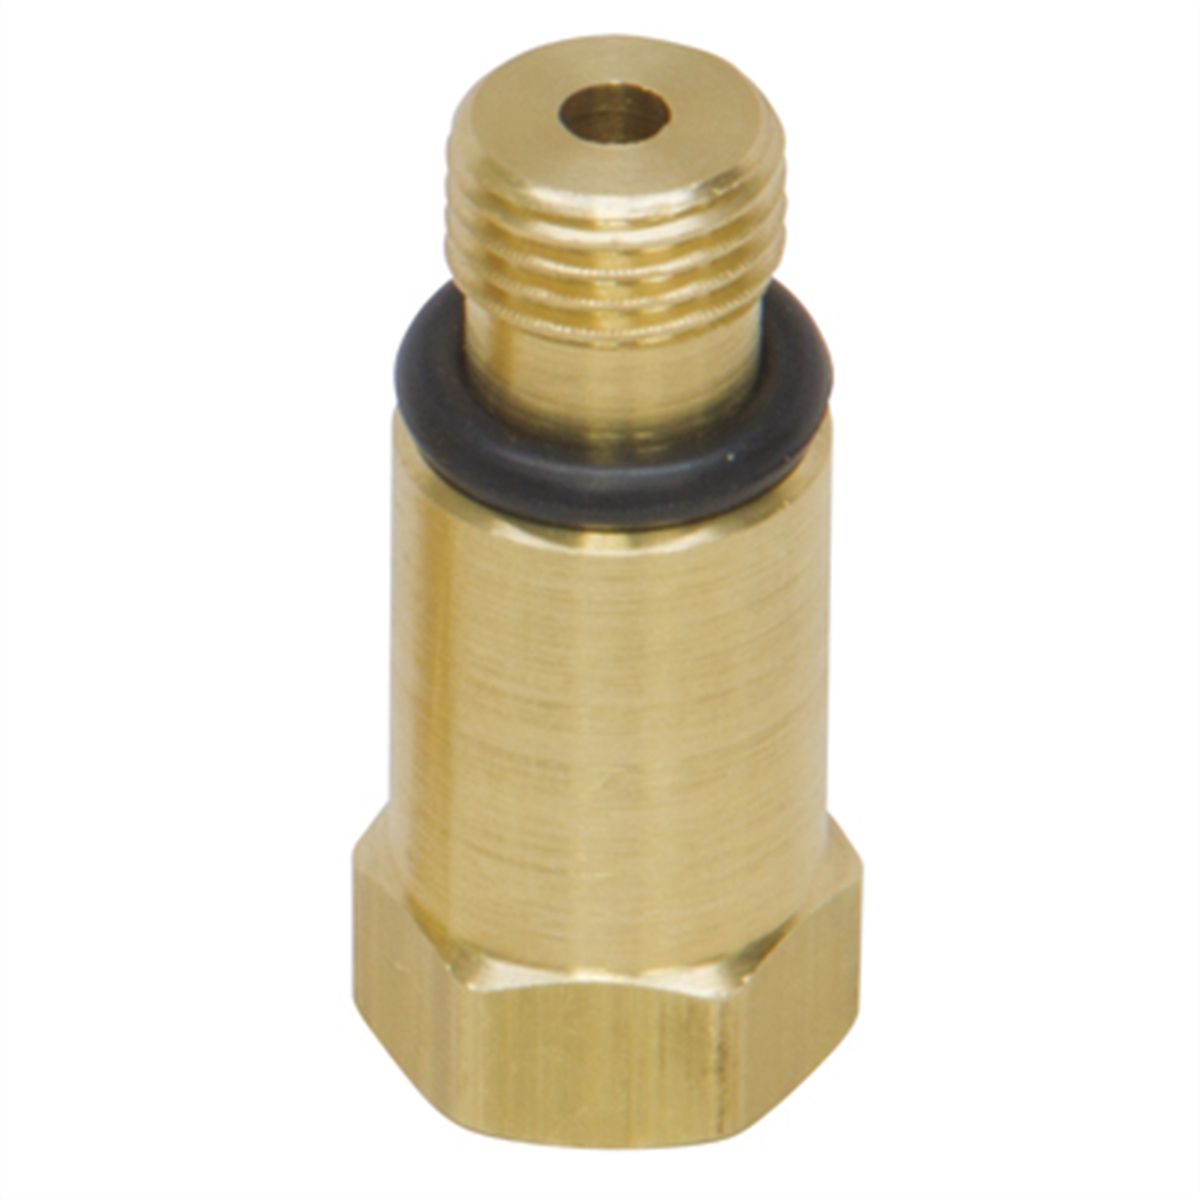 12mm Spark Plug Adapter for 20250